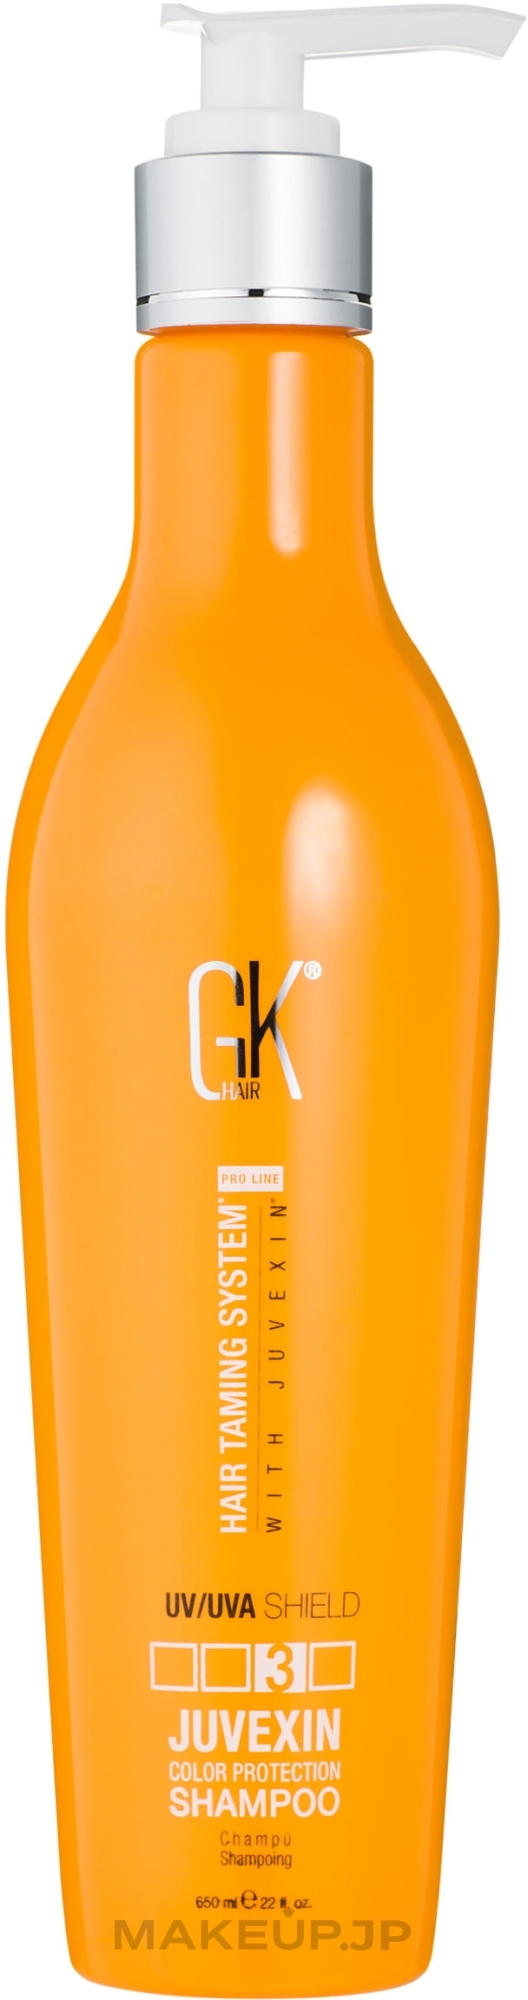 Colored Hair Shampoo - GKhair Juvexin Color Protection Shampoo — photo 650 ml